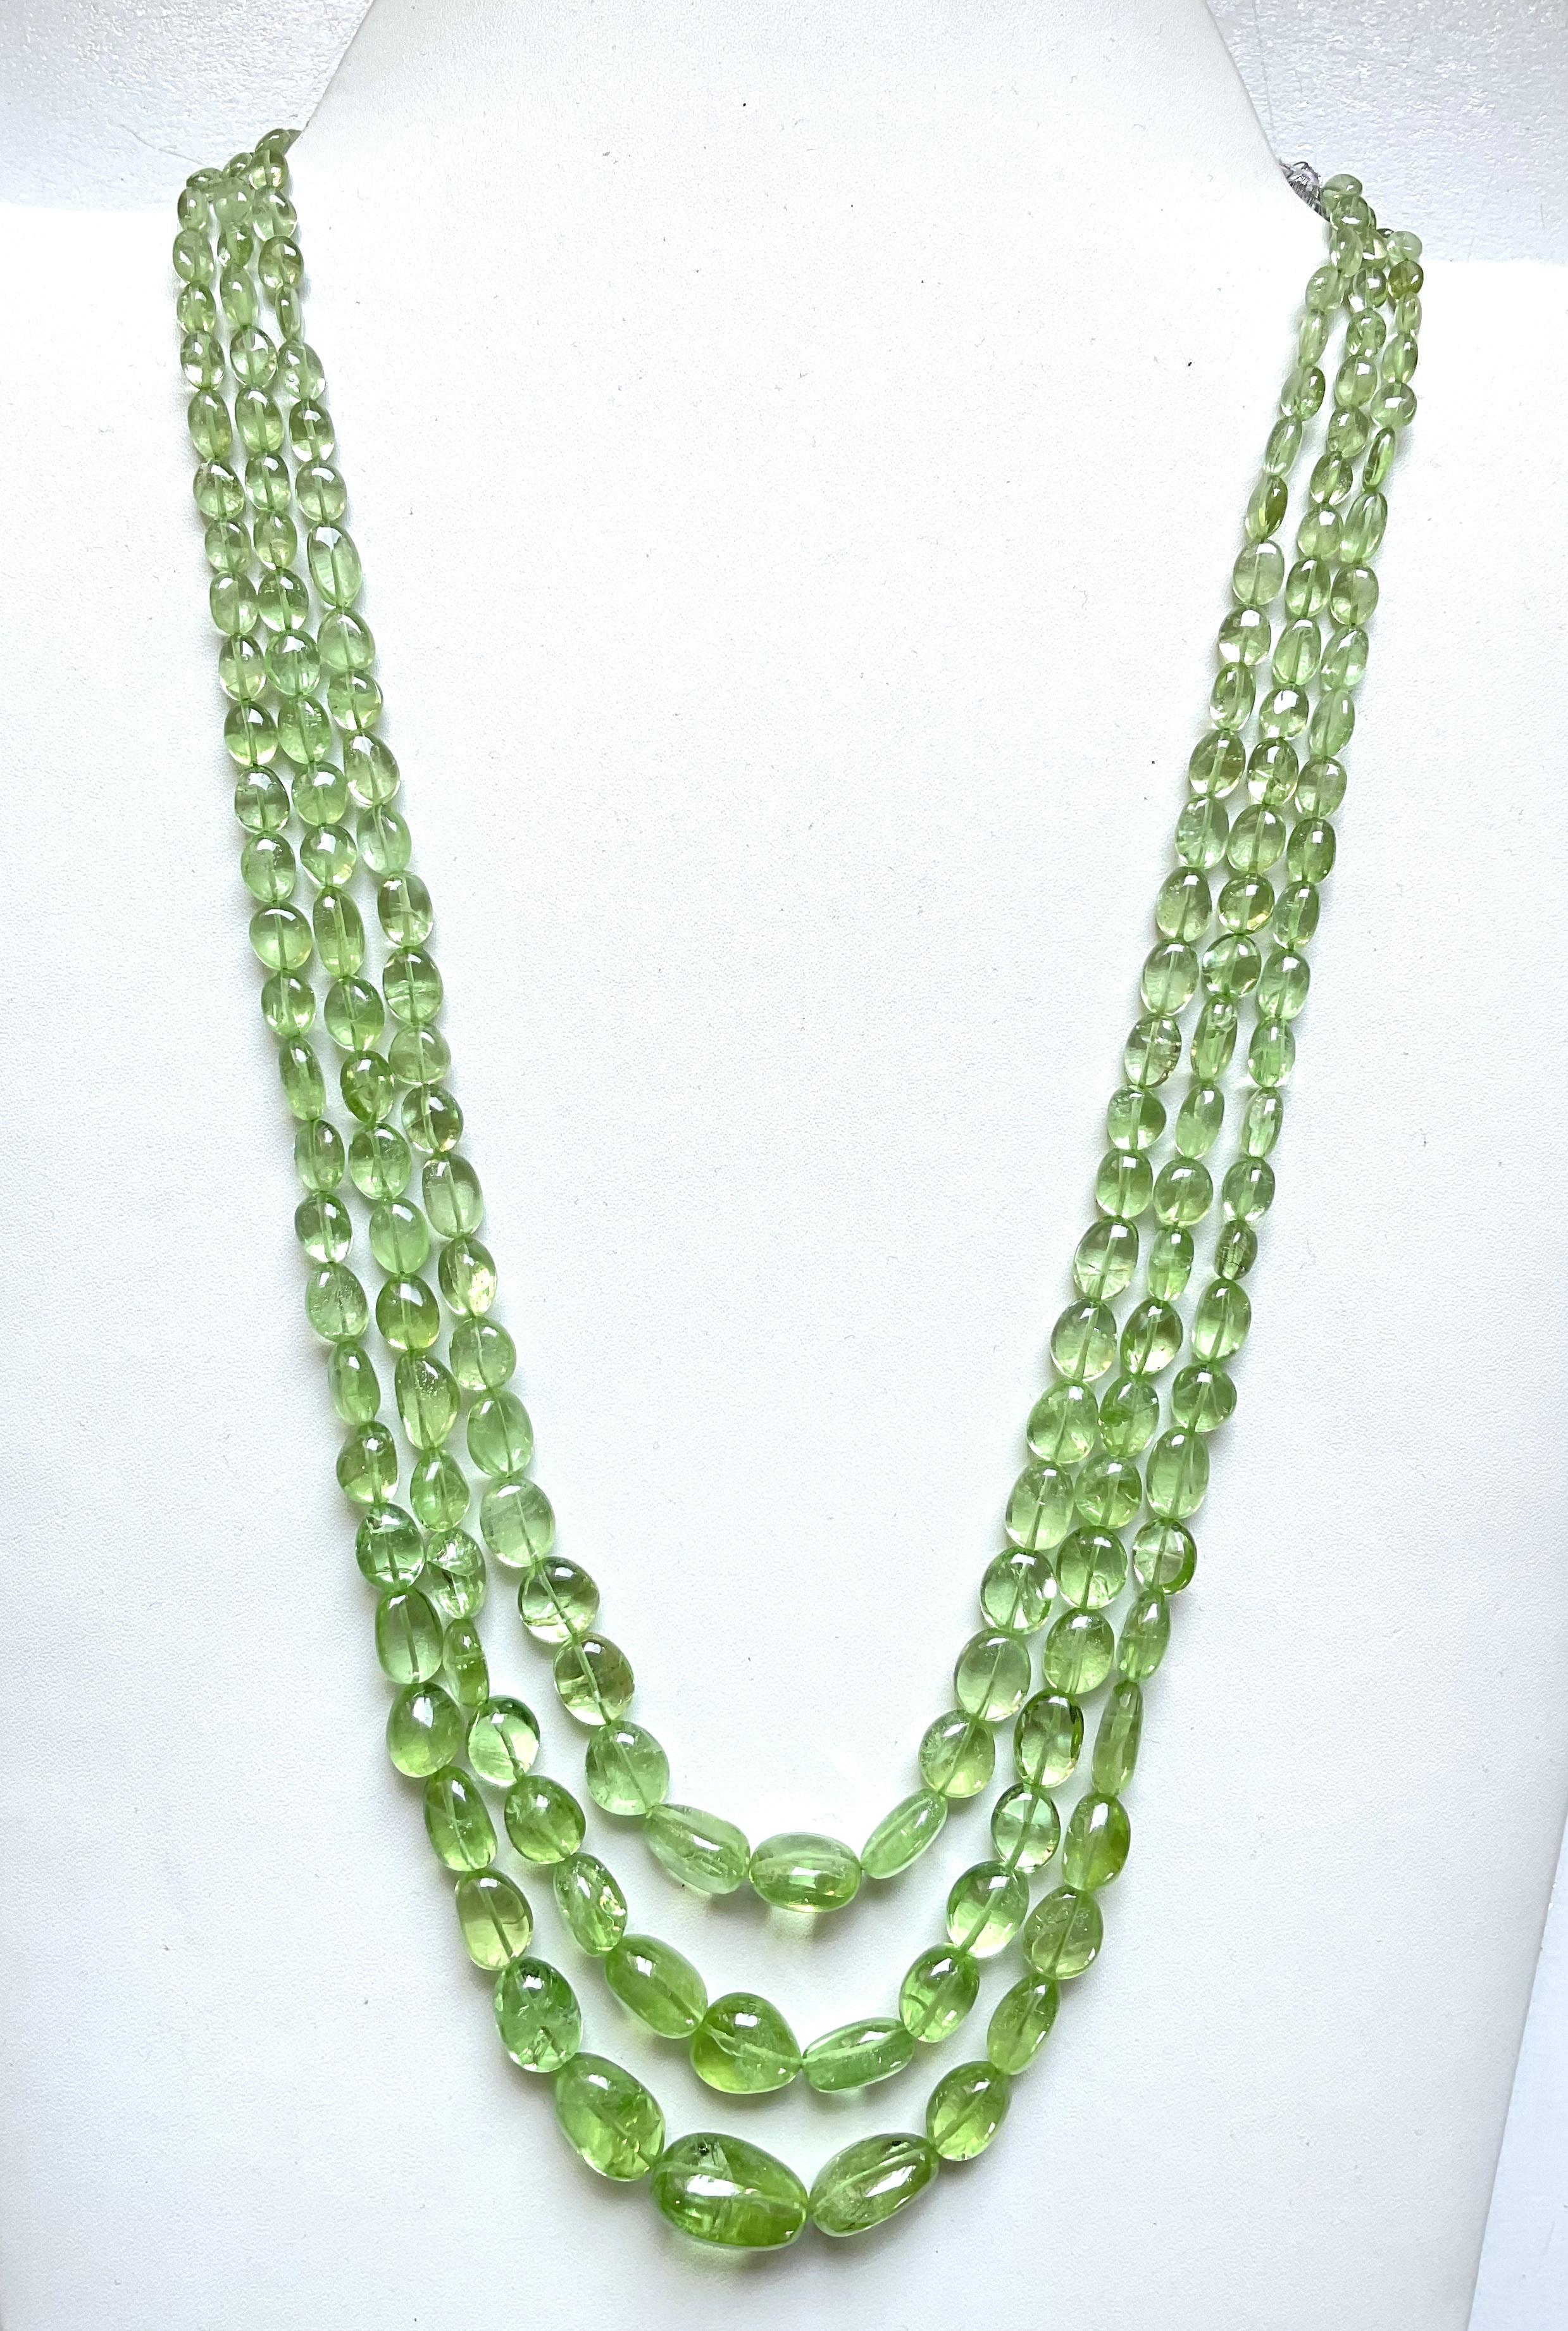 507.40 carats apple green peridot top quality plain tumbled natural necklace gem For Sale 3